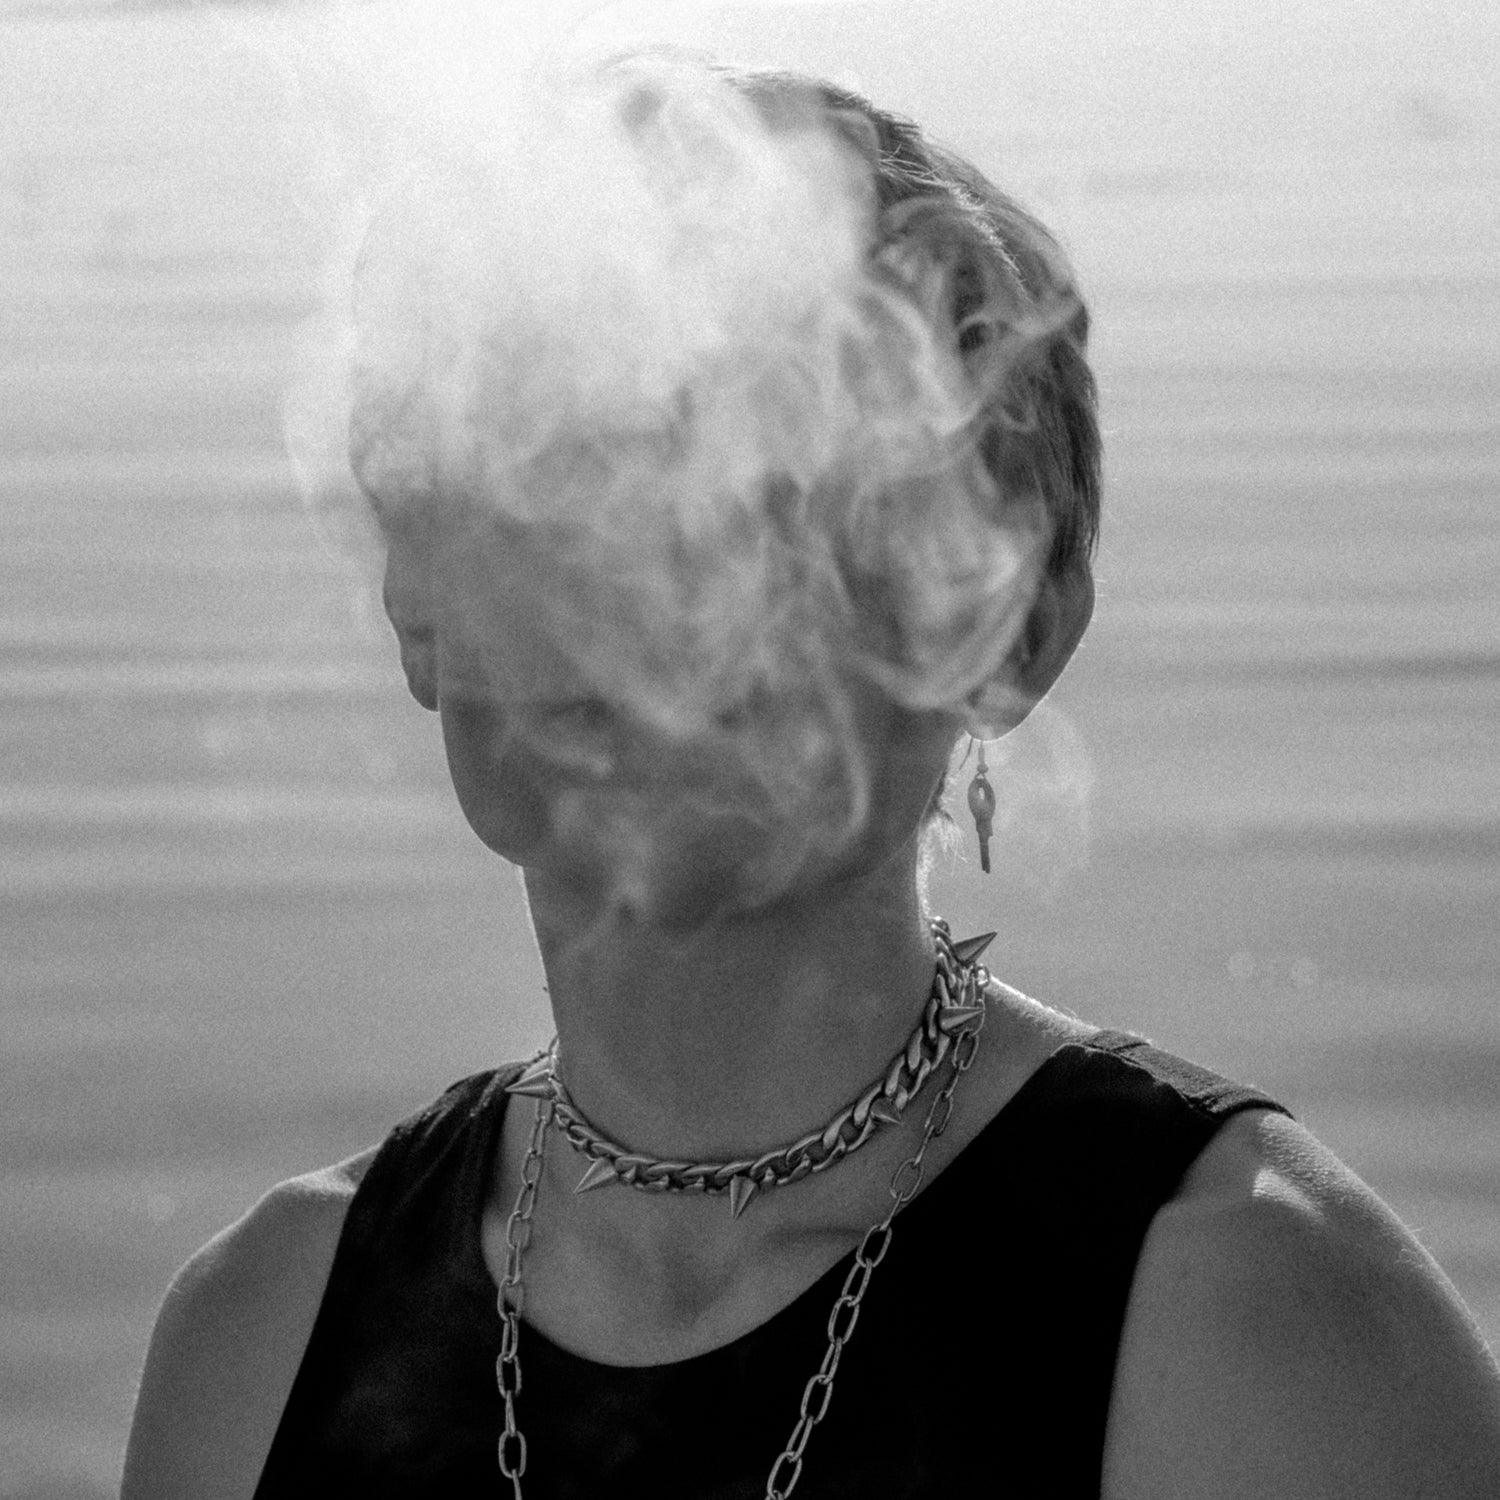 Non binary model exhaling smoke. The smoke is covering their face. They are wearing a black tank top, one key-shaped earring and two chain necklaces (one with spikes). The ocean is behind them.